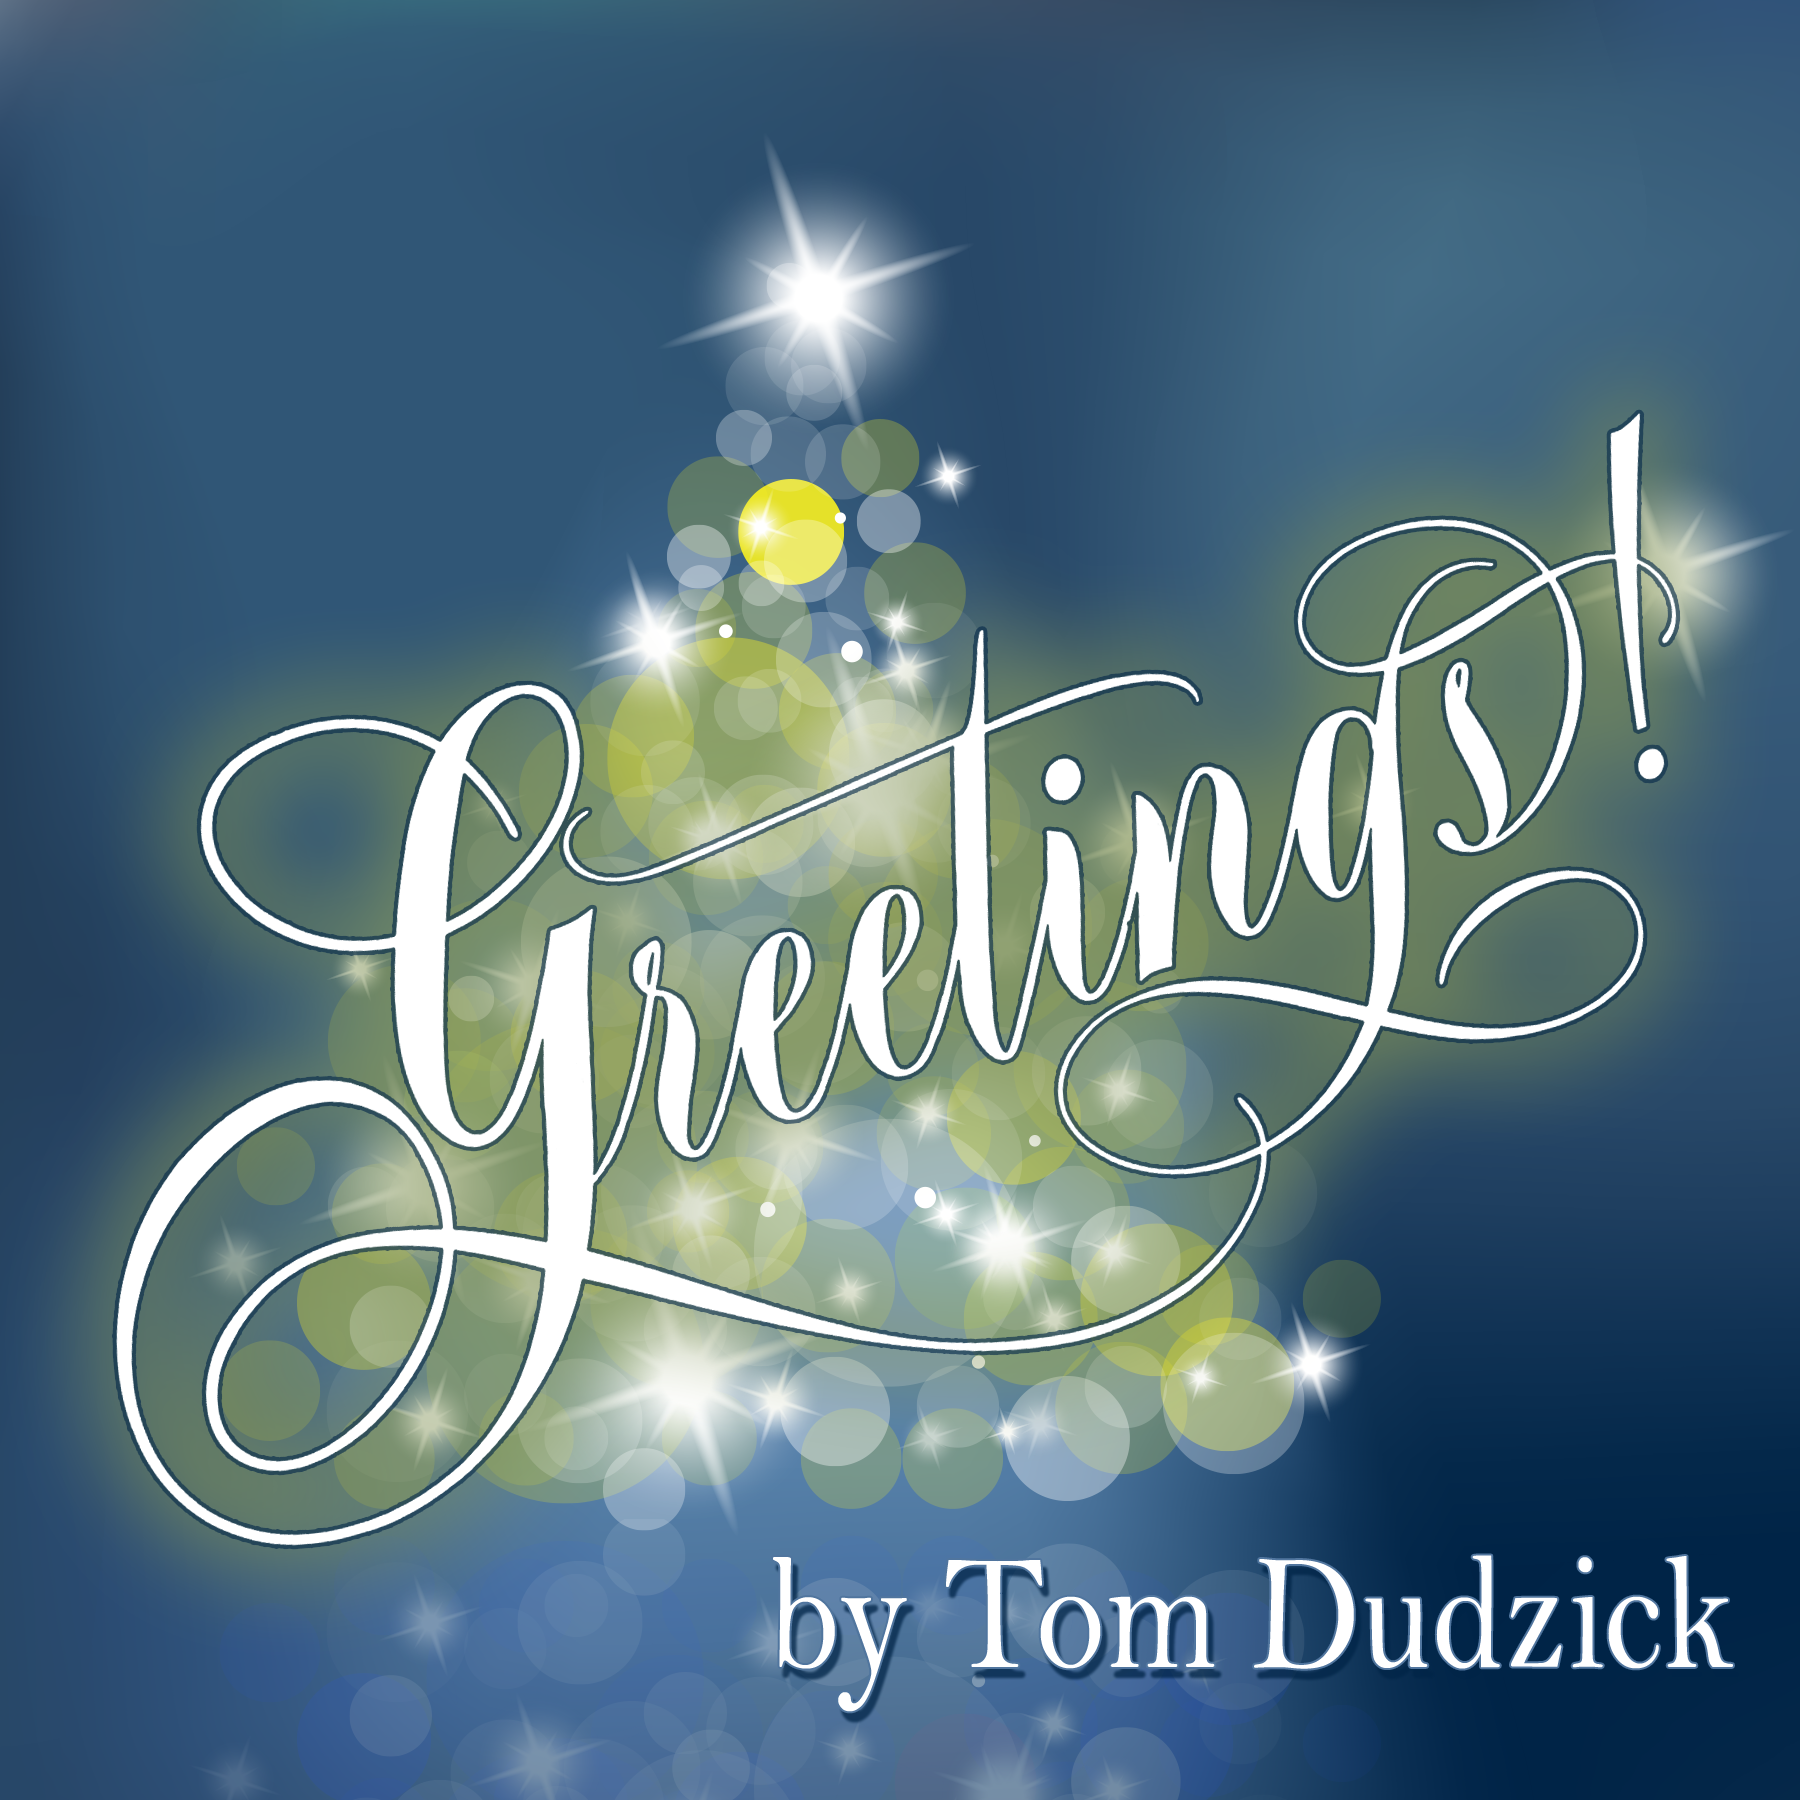 Artwork for Greetings! by Tom Dudzick
